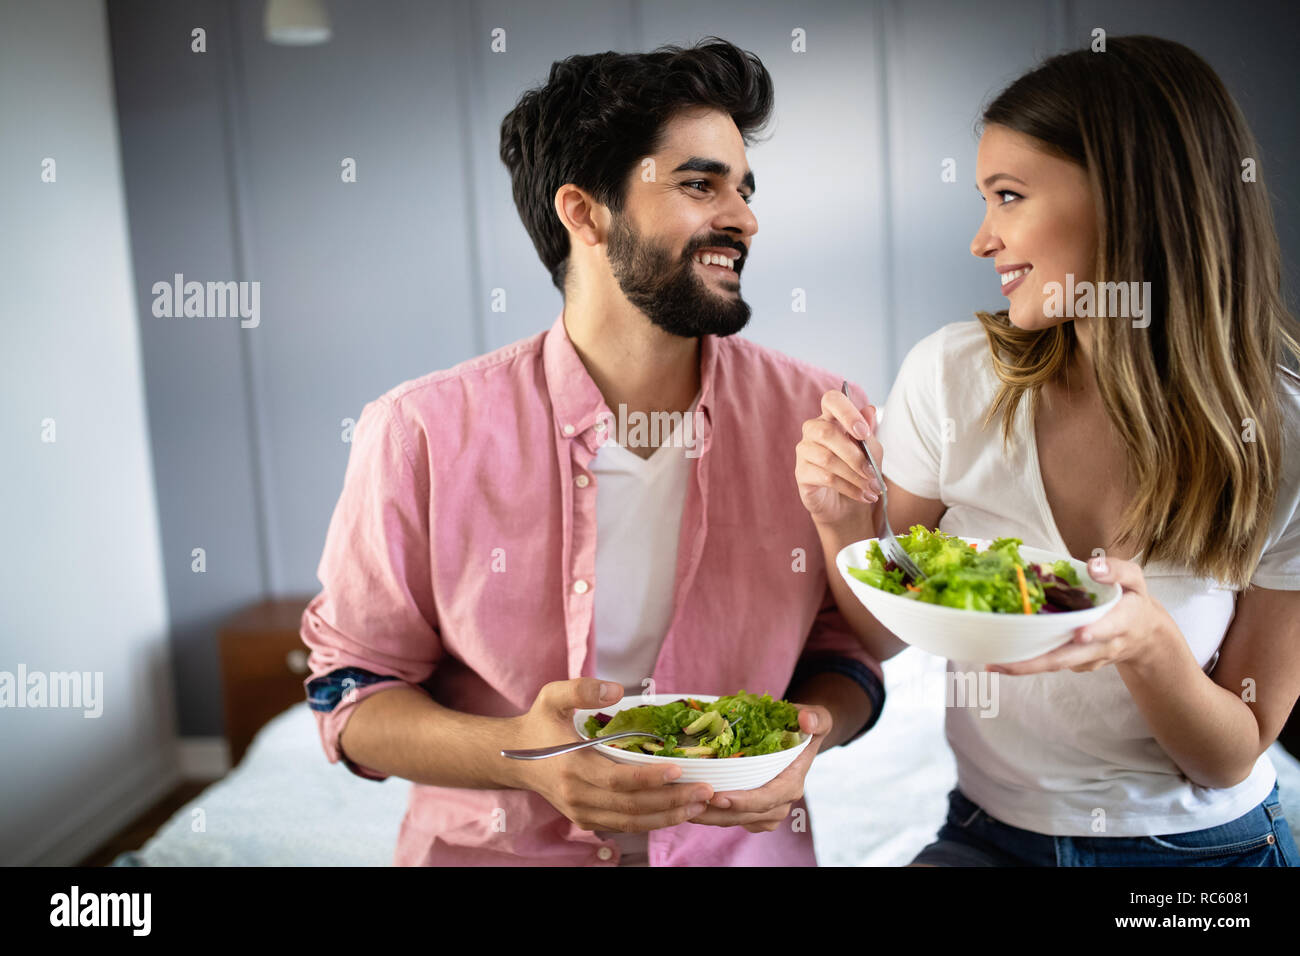 Image of happy young couple eating salad at home Stock Photo